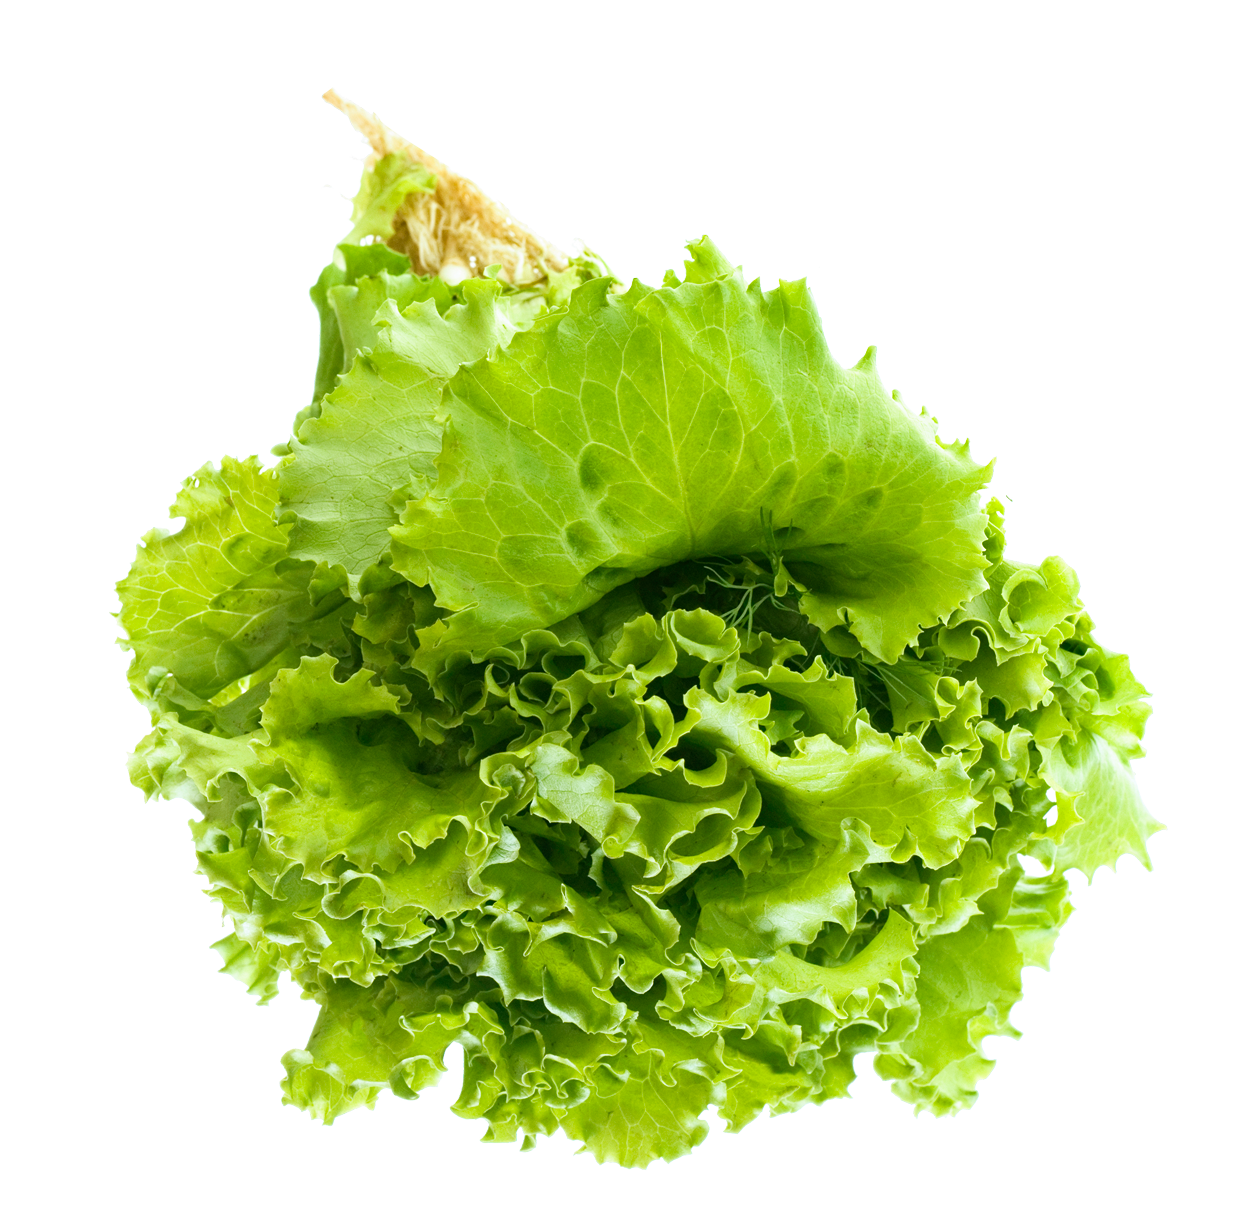 A Green Leafy Lettuce On A Black Background